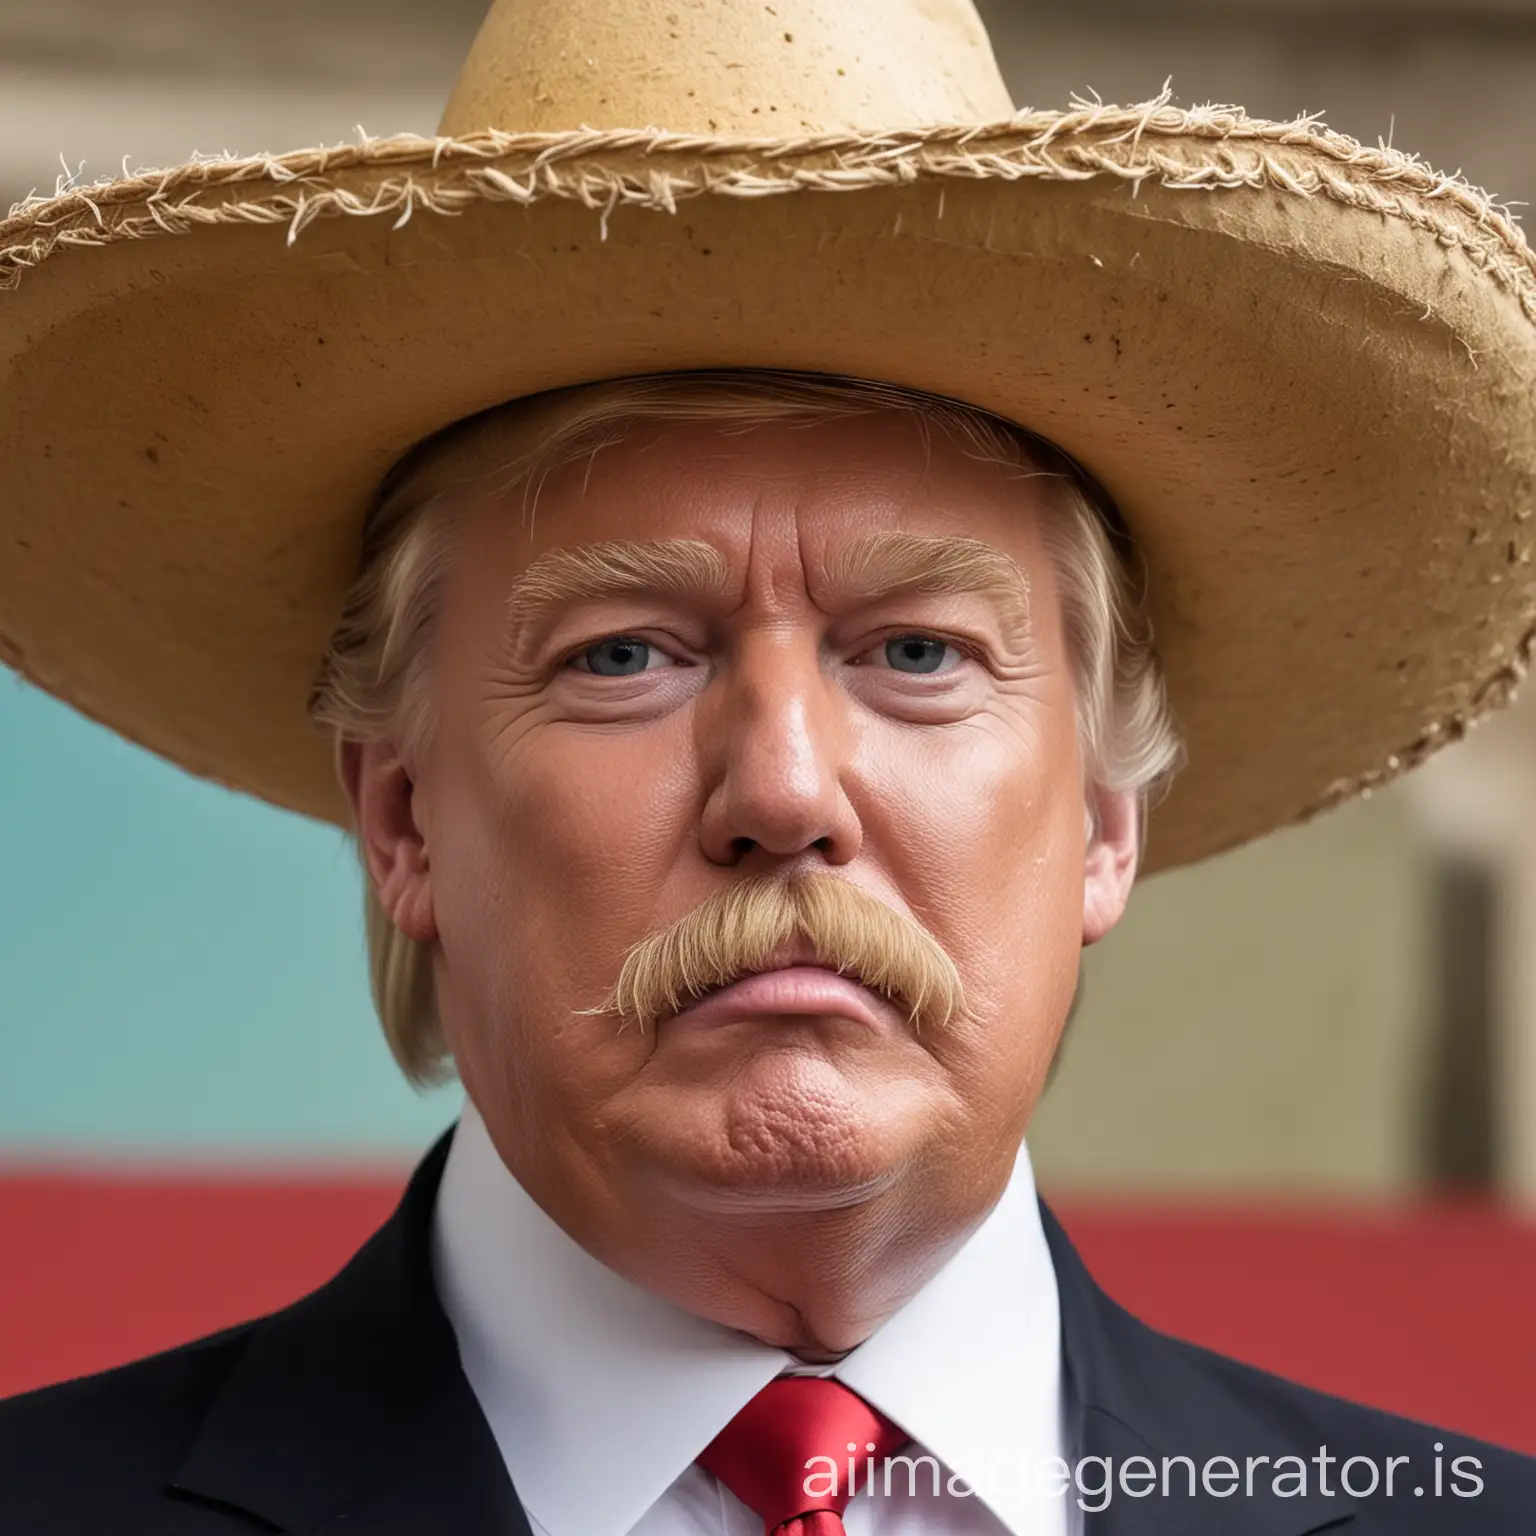 donald trump with a moustache and wearing a sombrero